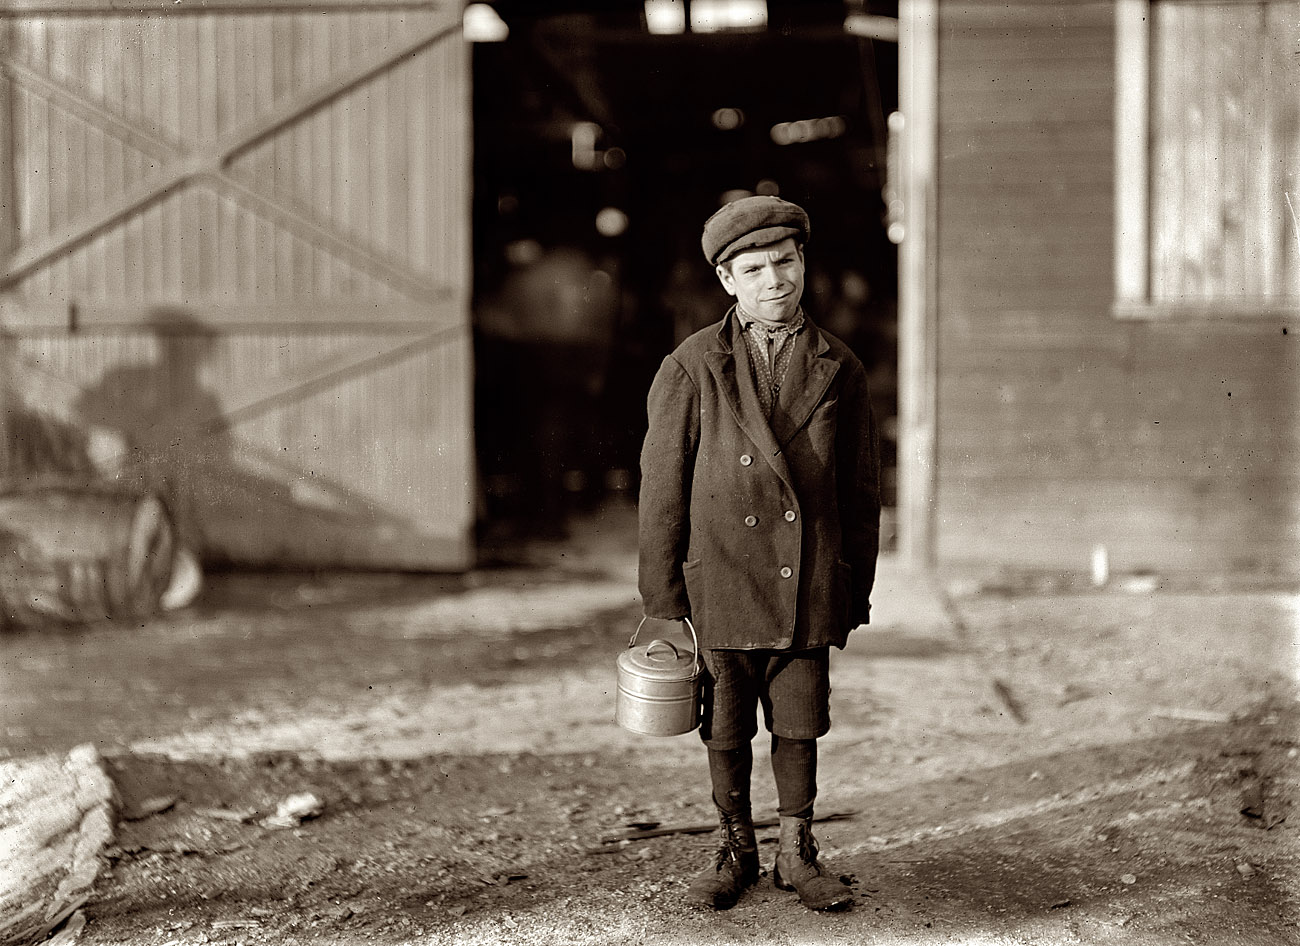 October 1908. Fairmont, W.Va. Monongah Glass Co. Jo Before, a glassworks boy going home, 5 p.m. He says he is 12 years old, and has been at it one year. Is a "ketchin-up-boy" for 70 cents a day; says glass business is all right. Asked if he was going to be a glassblower when he grows up, he said, "Sure!" Goes to school; asked if he had to, he answered "Don't unless I want to"; asked why he went then, said, "Want to learns something." Photograph by Lewis Wickes Hine. View full size. 